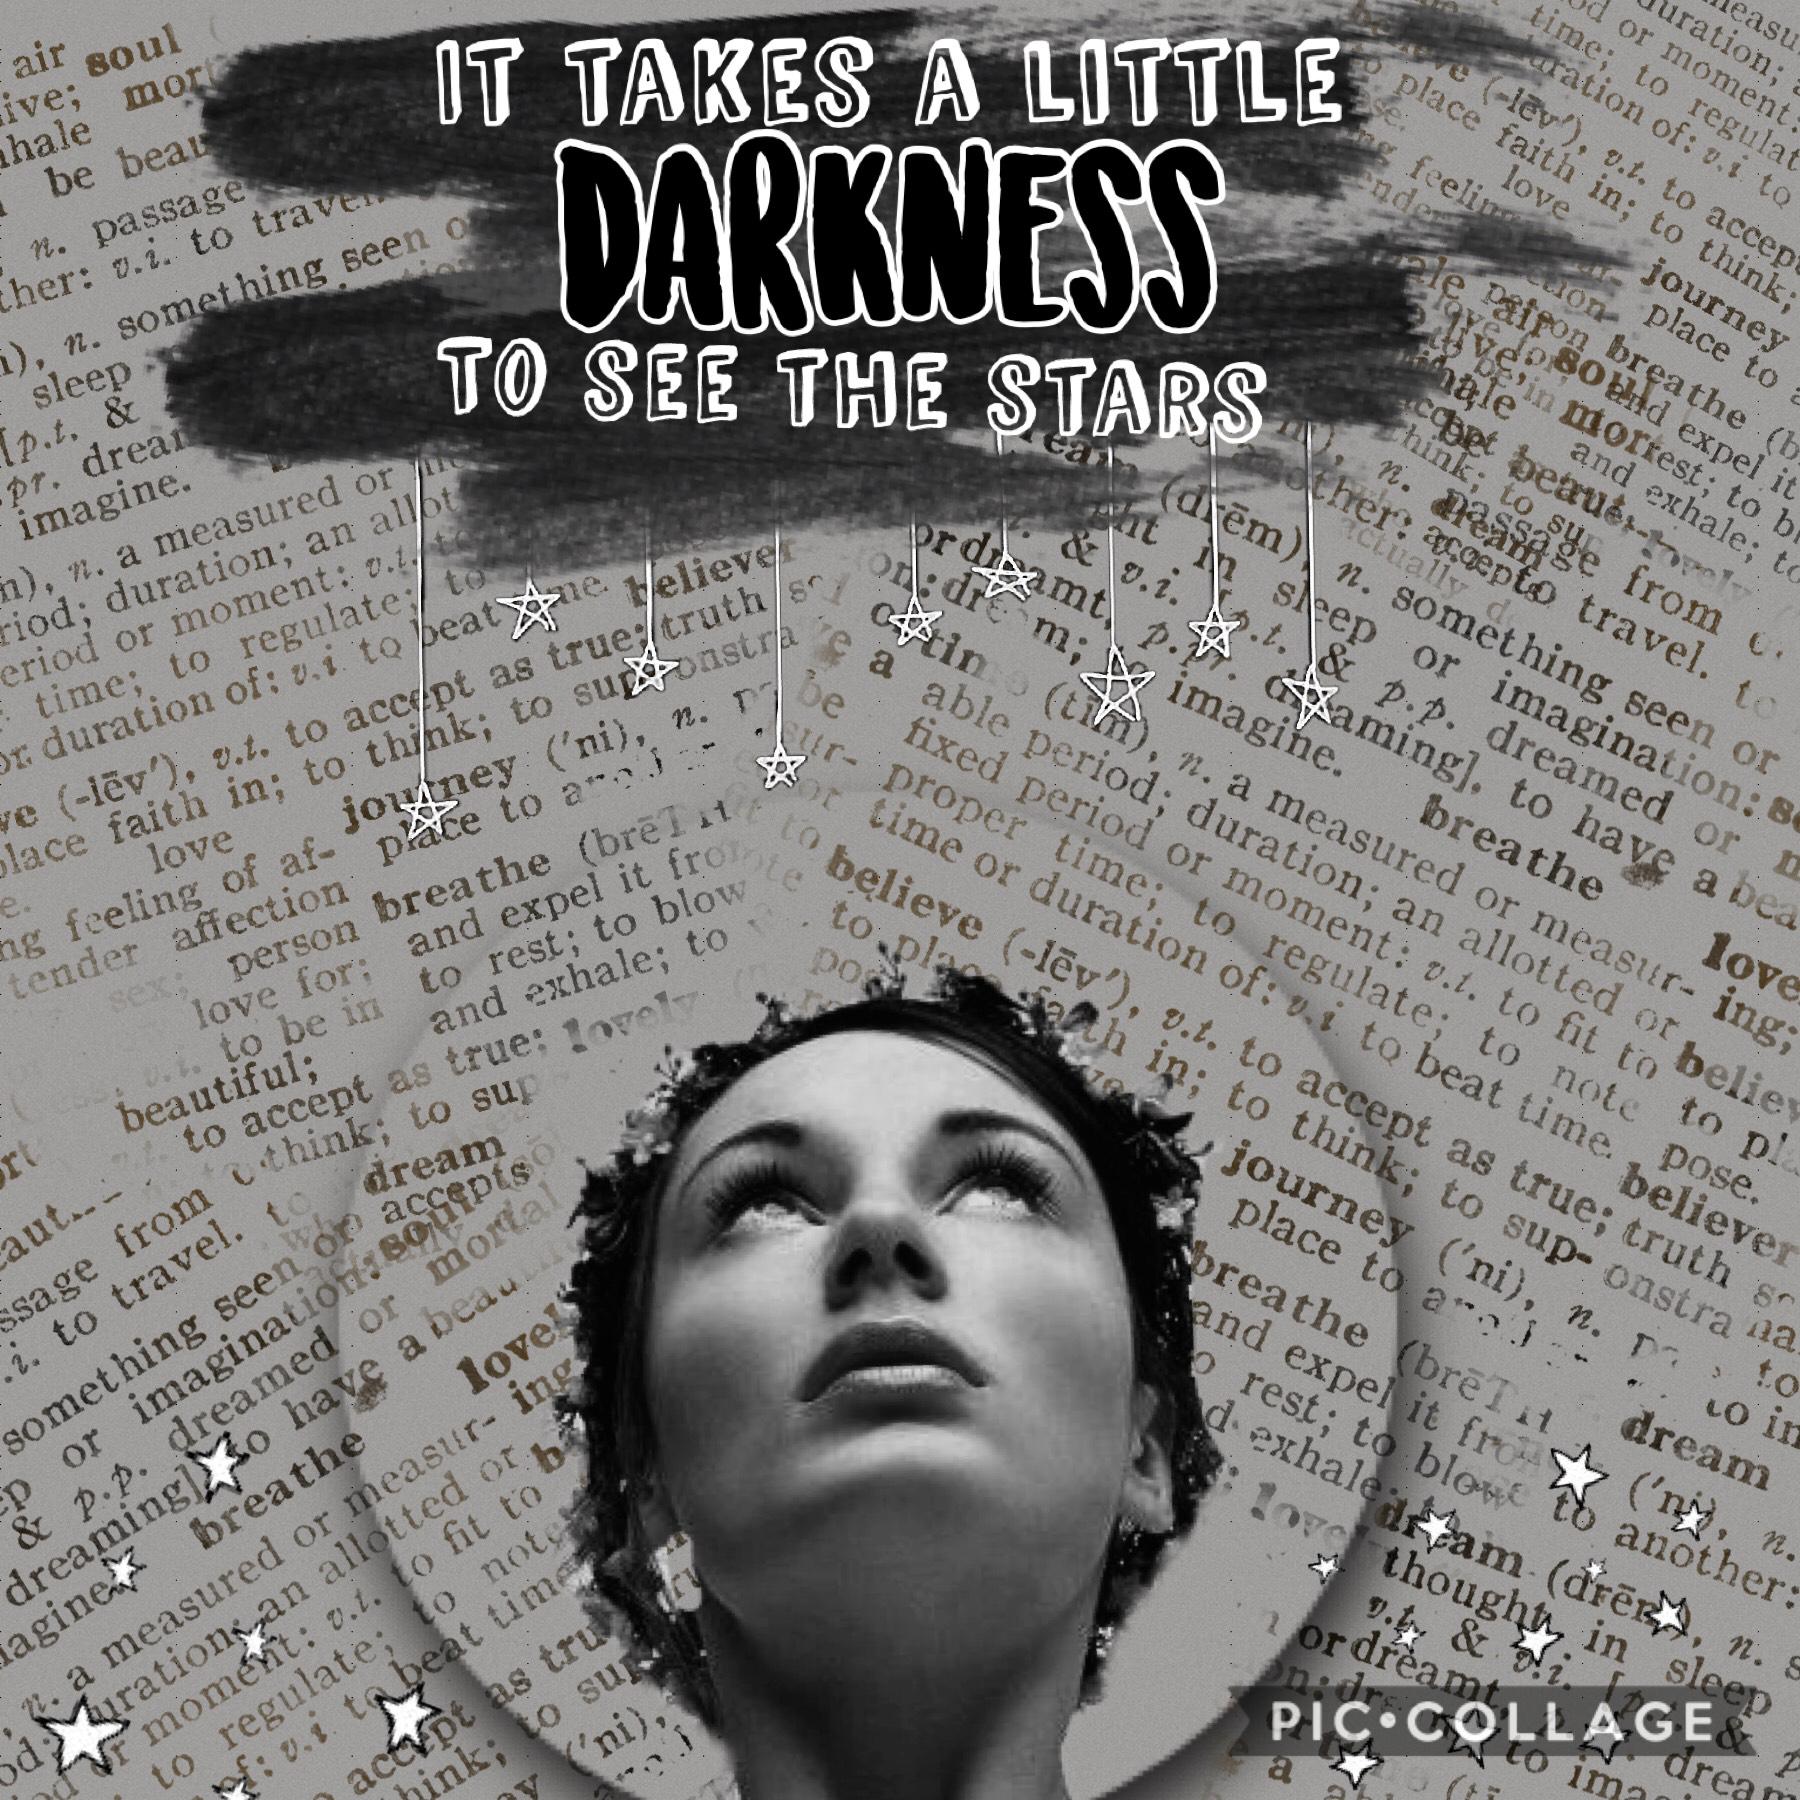 •tAp•
🖤Takes a little darkness🖤